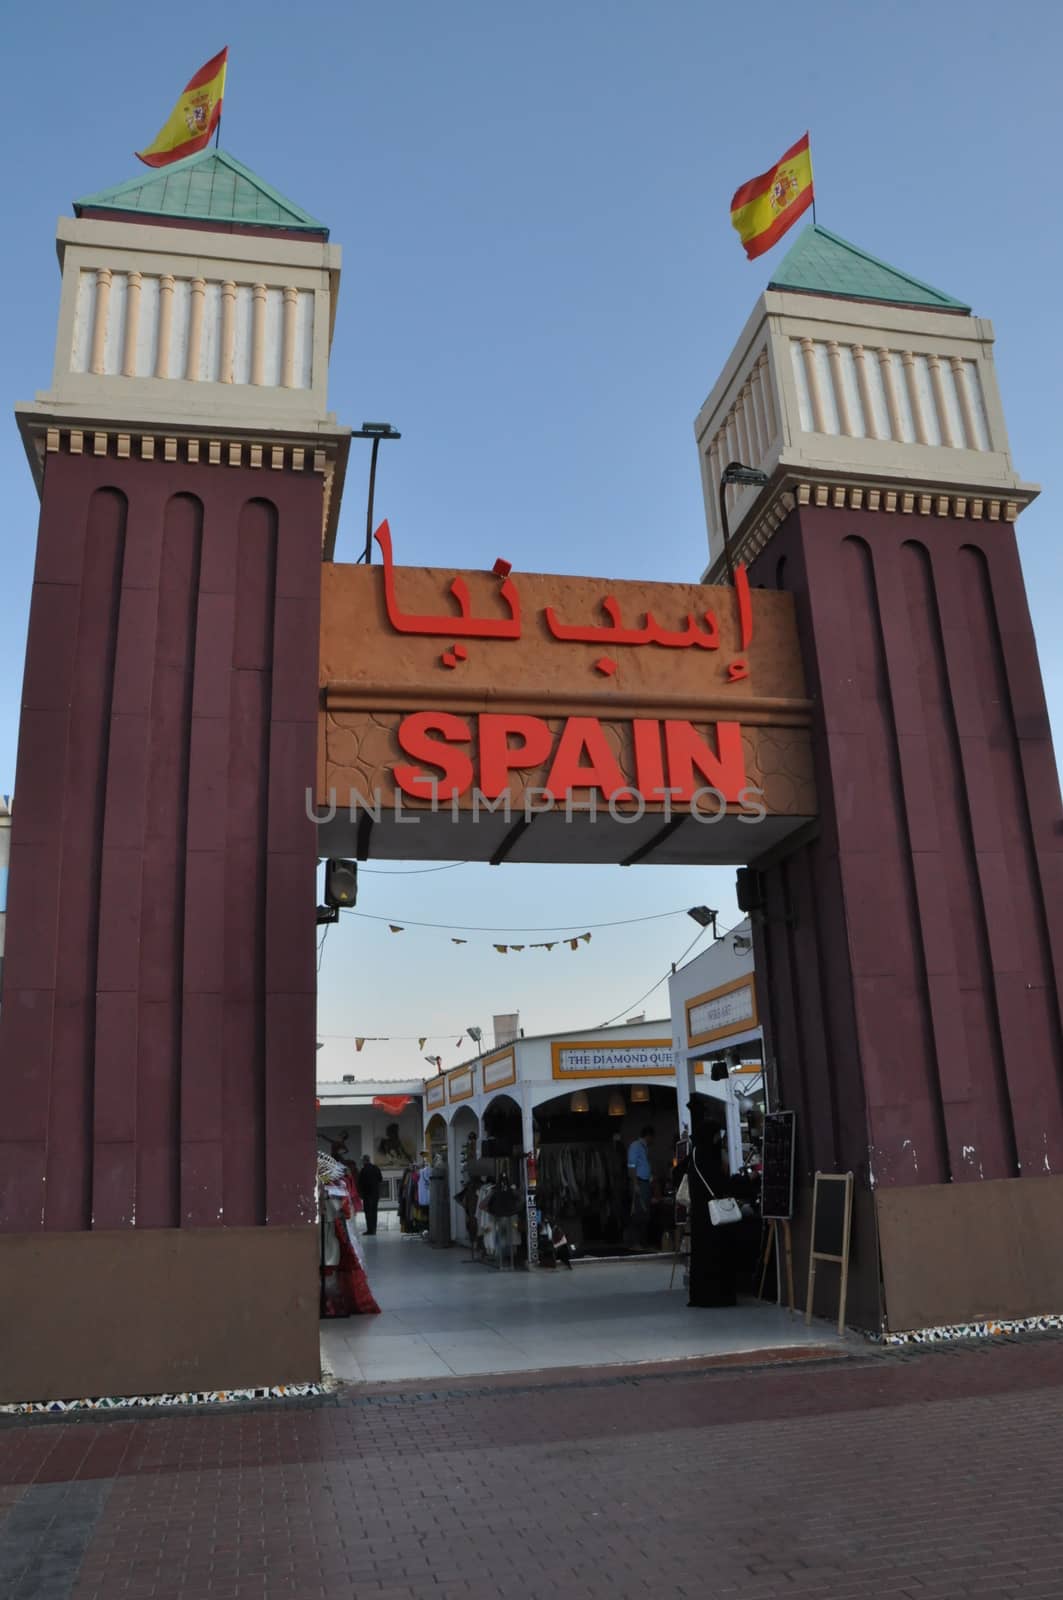 Spain pavilion at Global Village in Dubai, UAE. It is claimed to be the world's largest tourism, leisure and entertainment project.